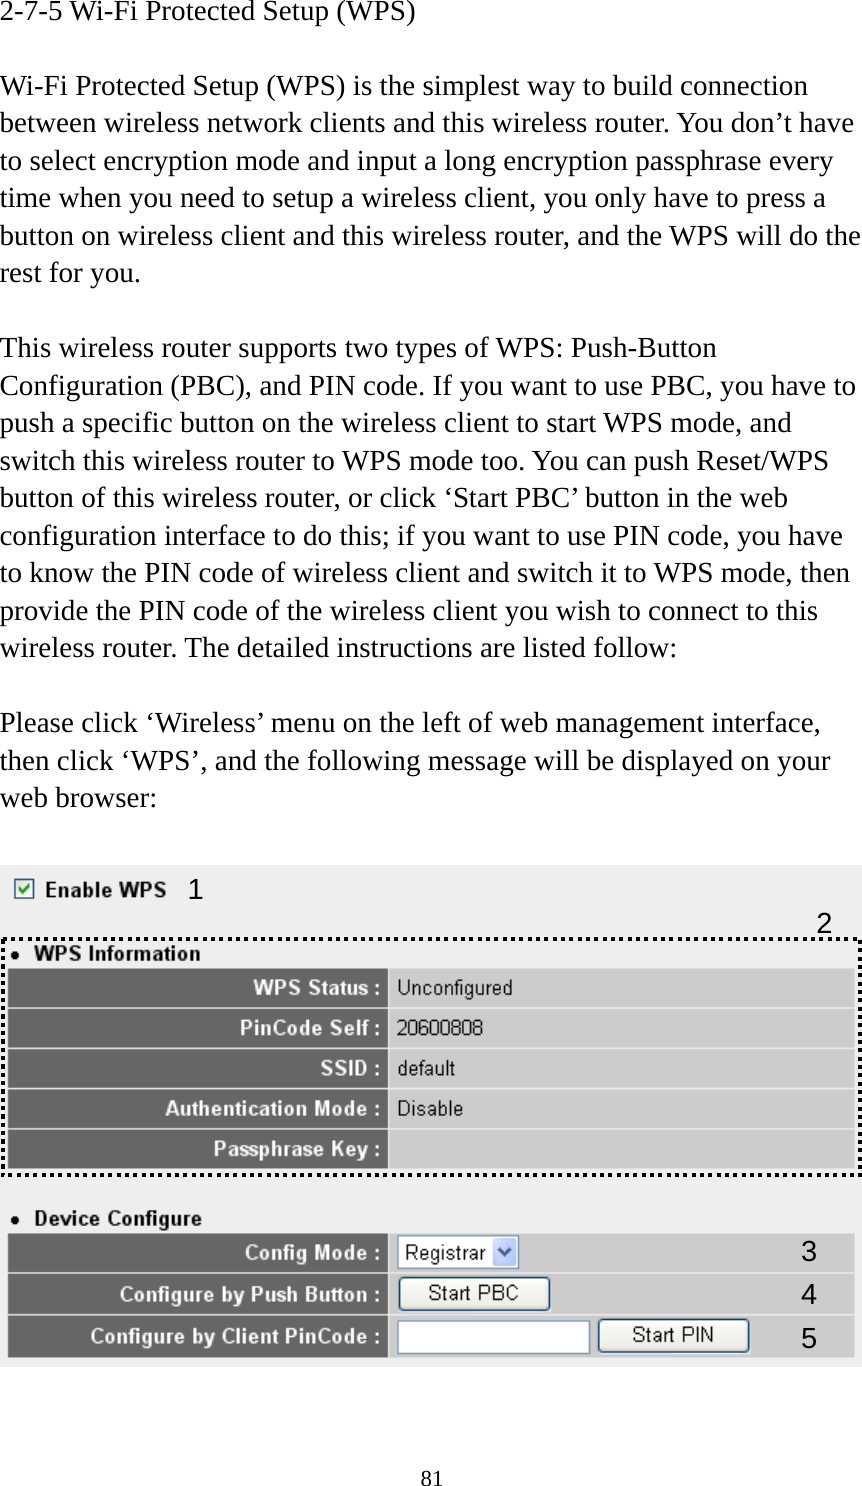 81 2-7-5 Wi-Fi Protected Setup (WPS)  Wi-Fi Protected Setup (WPS) is the simplest way to build connection between wireless network clients and this wireless router. You don’t have to select encryption mode and input a long encryption passphrase every time when you need to setup a wireless client, you only have to press a button on wireless client and this wireless router, and the WPS will do the rest for you.  This wireless router supports two types of WPS: Push-Button Configuration (PBC), and PIN code. If you want to use PBC, you have to push a specific button on the wireless client to start WPS mode, and switch this wireless router to WPS mode too. You can push Reset/WPS button of this wireless router, or click ‘Start PBC’ button in the web configuration interface to do this; if you want to use PIN code, you have to know the PIN code of wireless client and switch it to WPS mode, then provide the PIN code of the wireless client you wish to connect to this wireless router. The detailed instructions are listed follow:  Please click ‘Wireless’ menu on the left of web management interface, then click ‘WPS’, and the following message will be displayed on your web browser:    1 34 25 